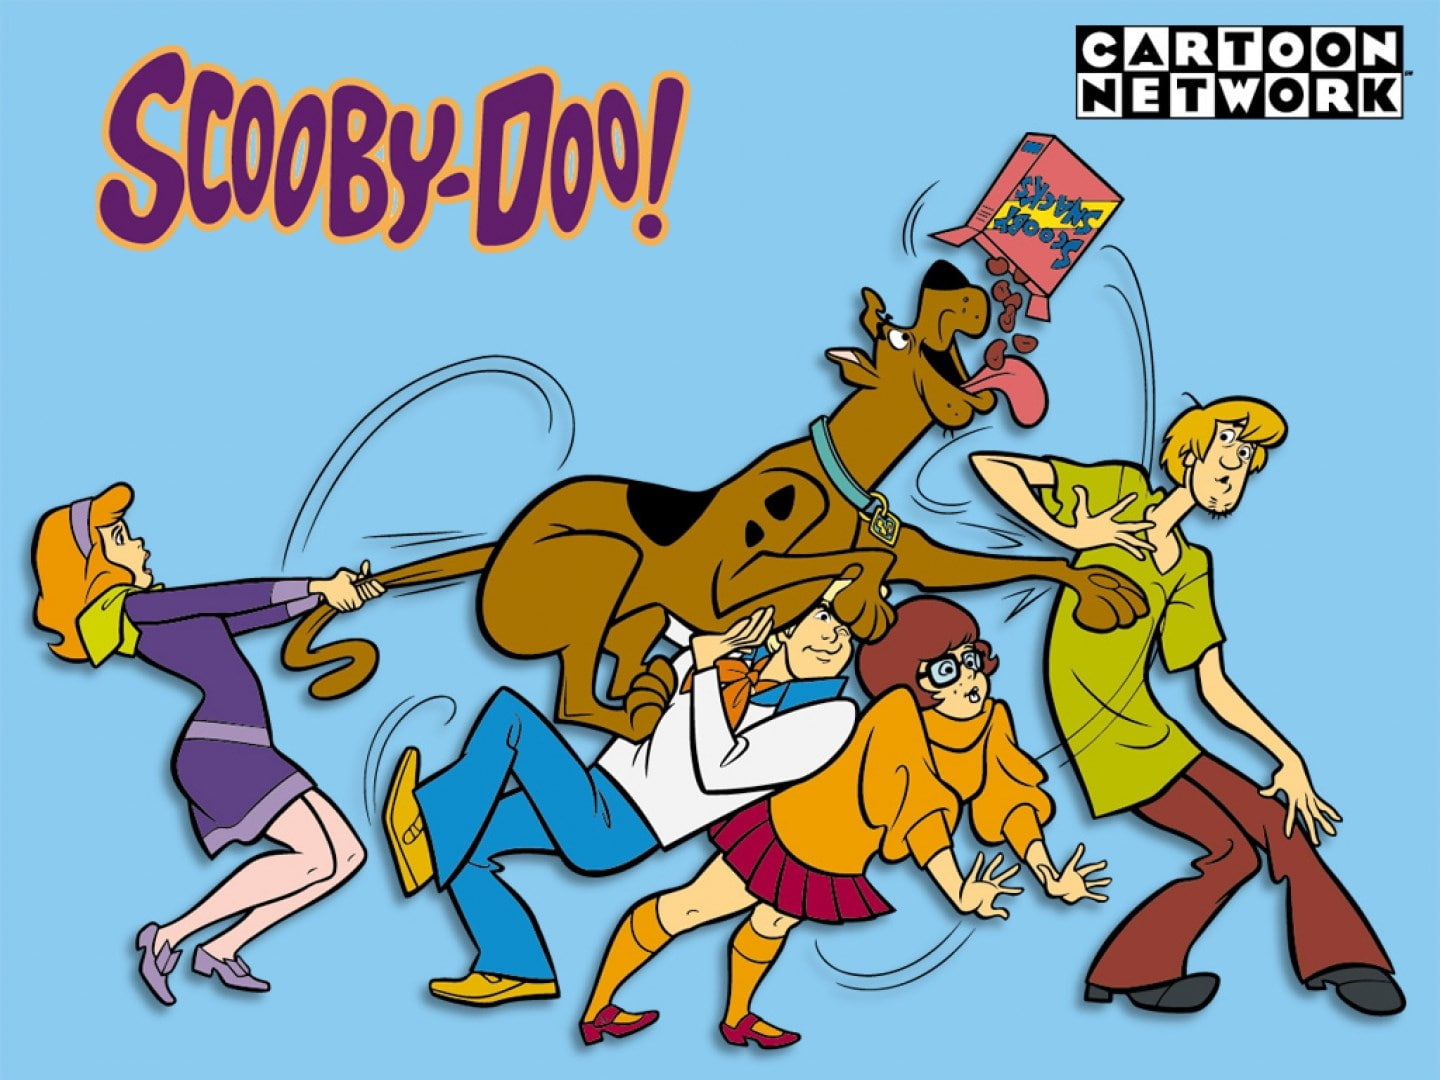 scooby doo, communication, text, western script, sign, people